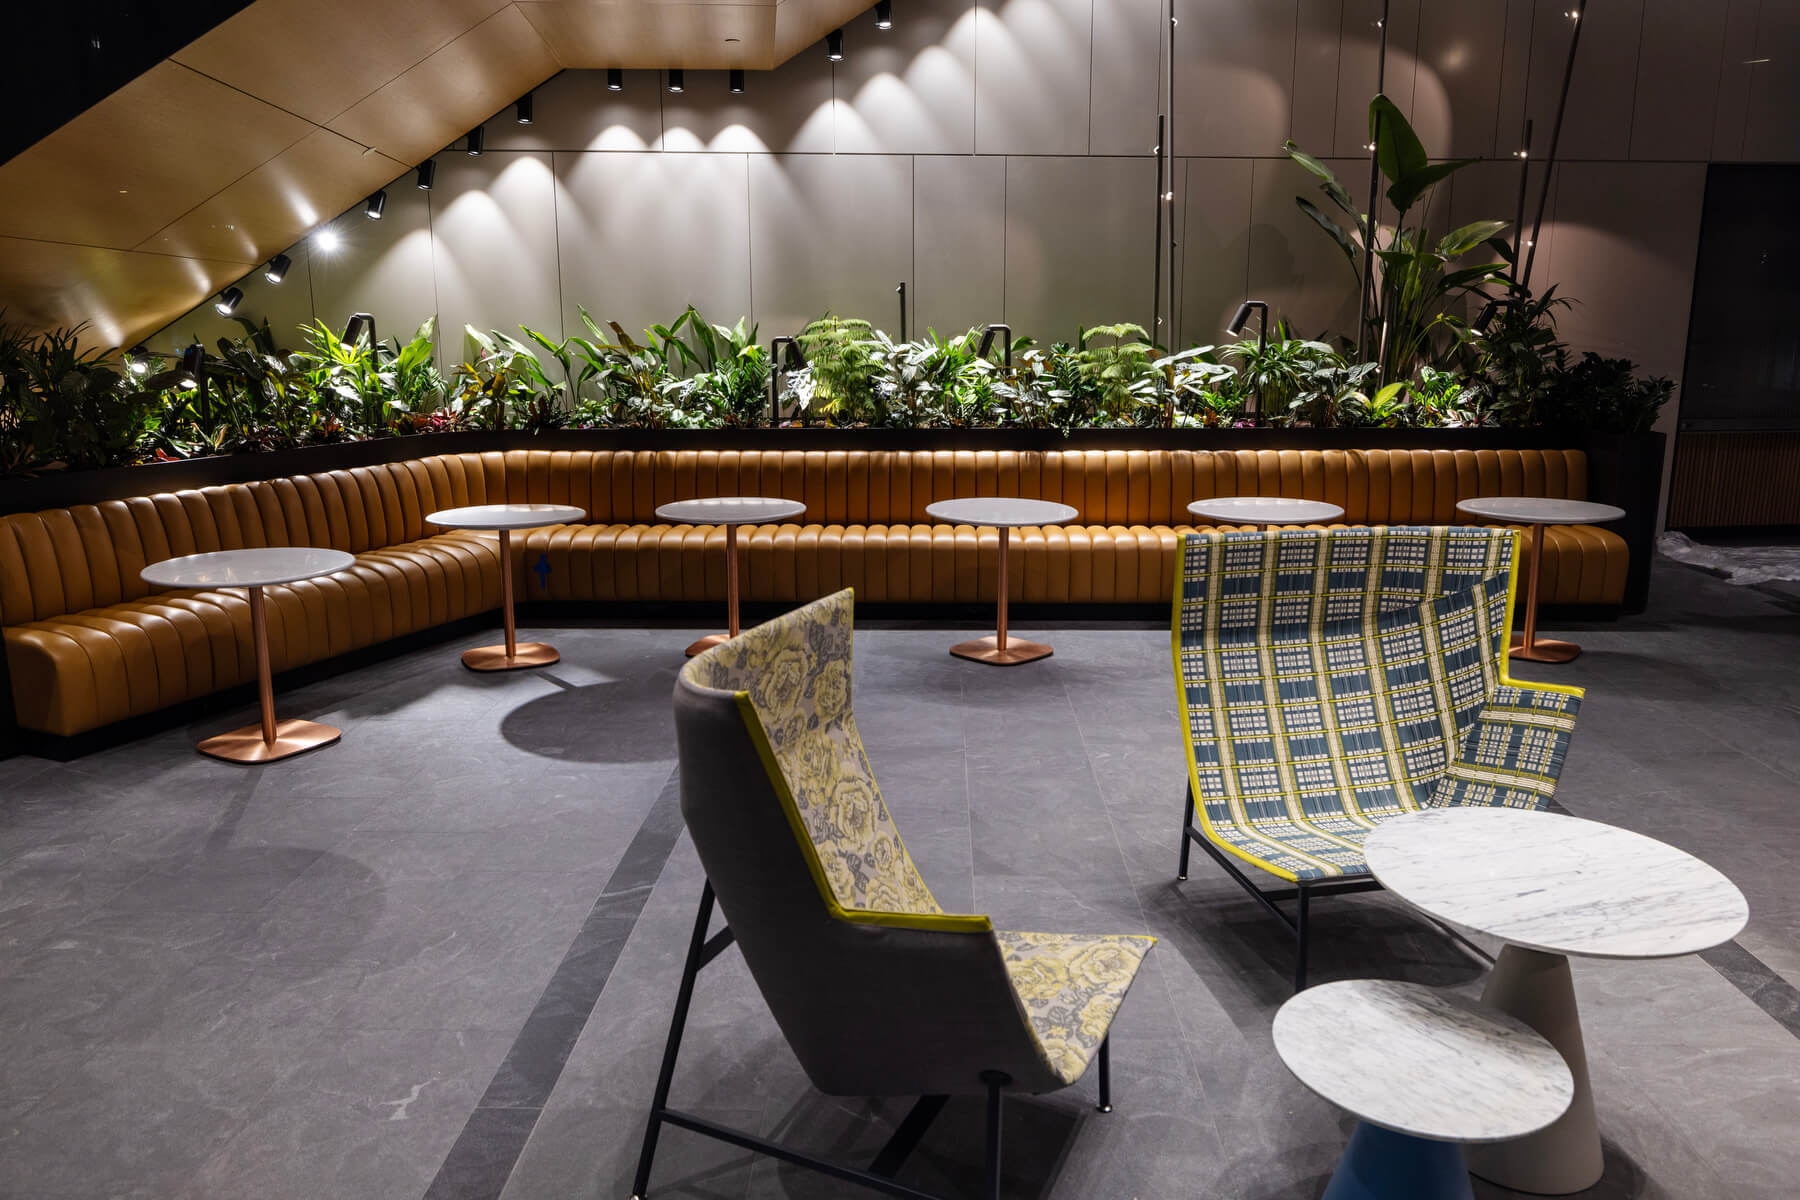 An image of a sitting area at Amazon's HQ2. There is a large booth with seating and a small table with chairs around it. There are also plants and lights in the background.